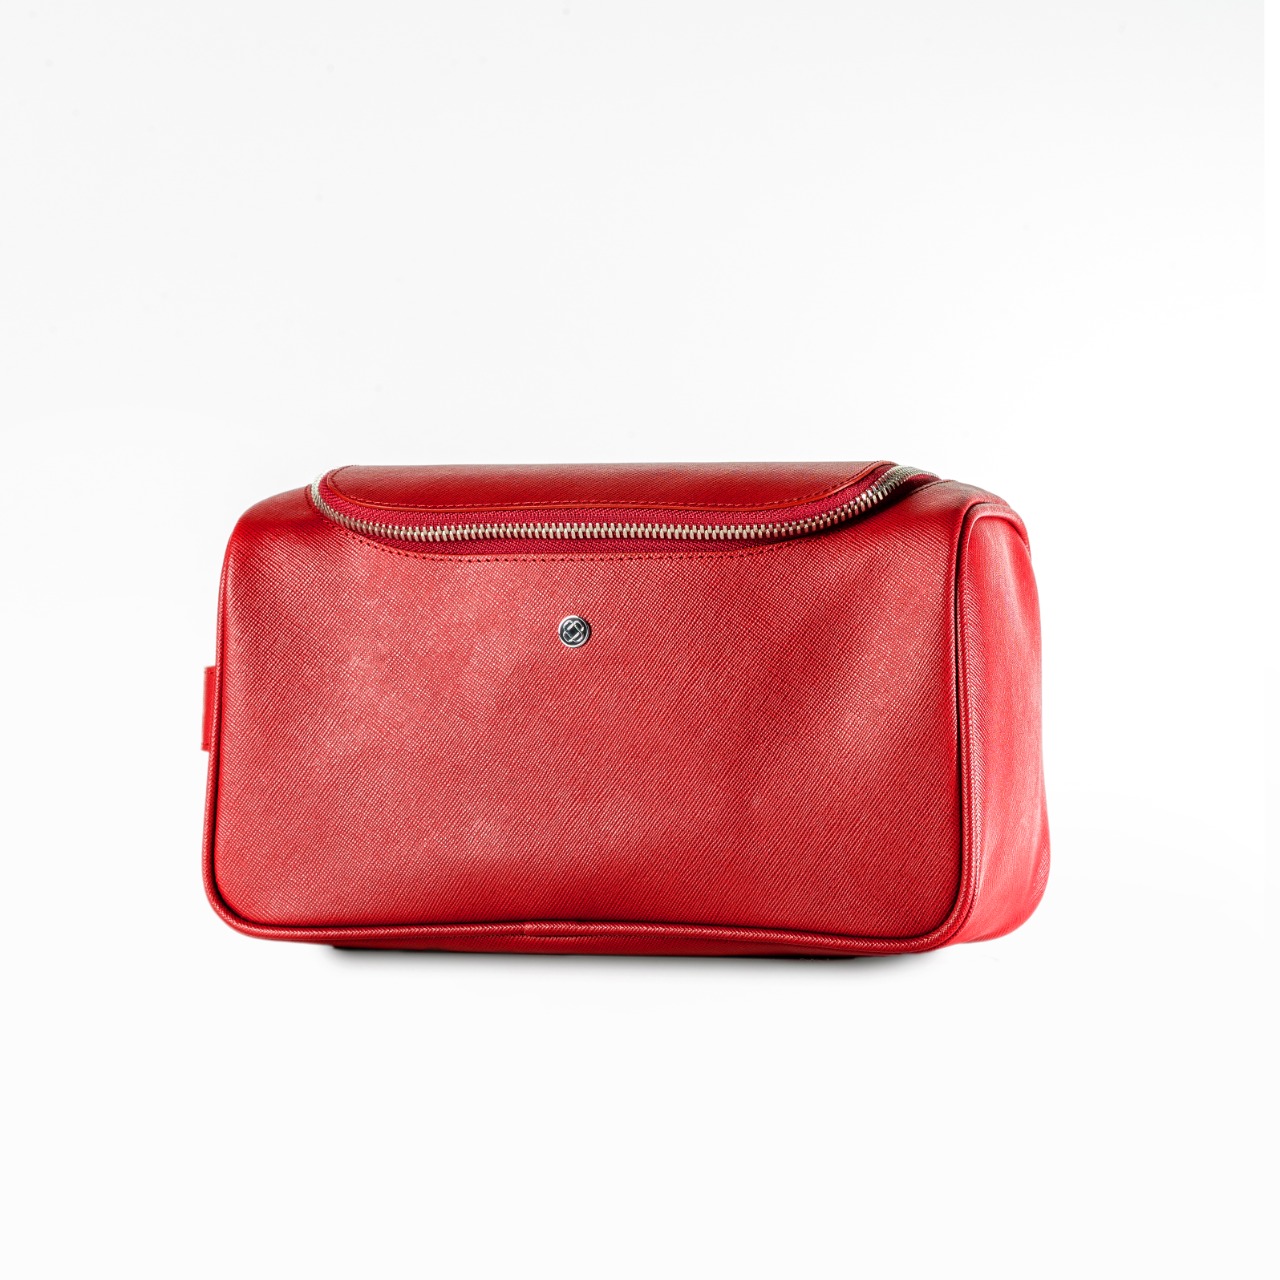 OBH TRAVEL POUCH SAFFIANO RED | OBH